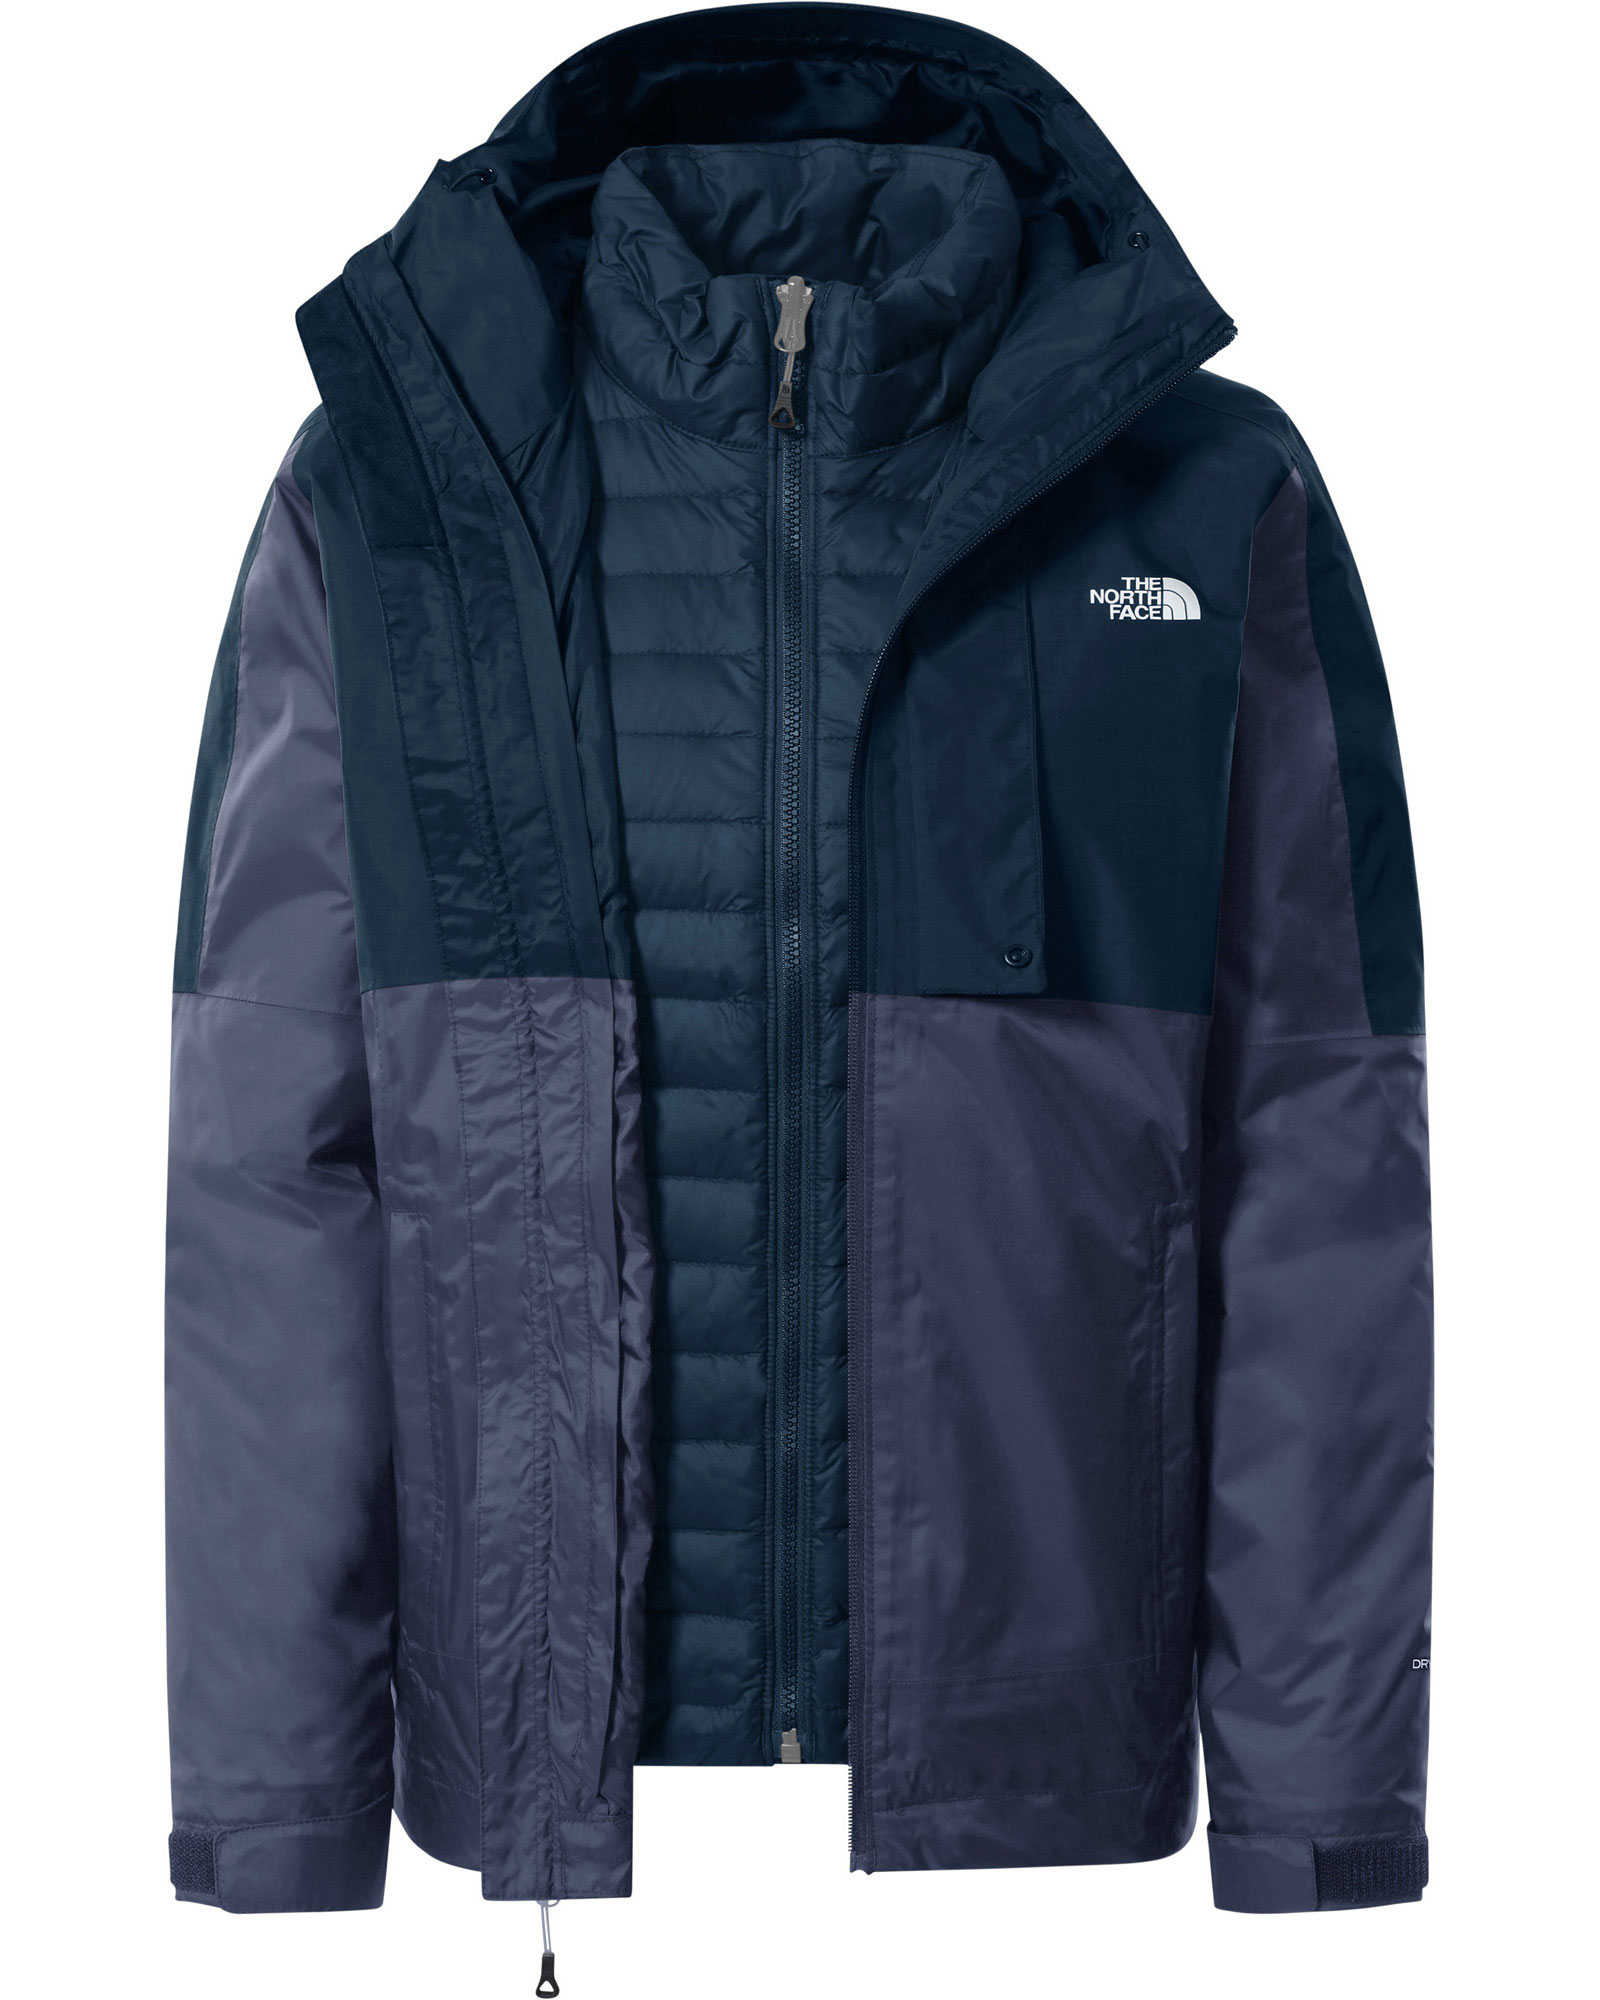 The North Face Down Insulated Triclimate Women’s Parka Jacket - Shady Blue L